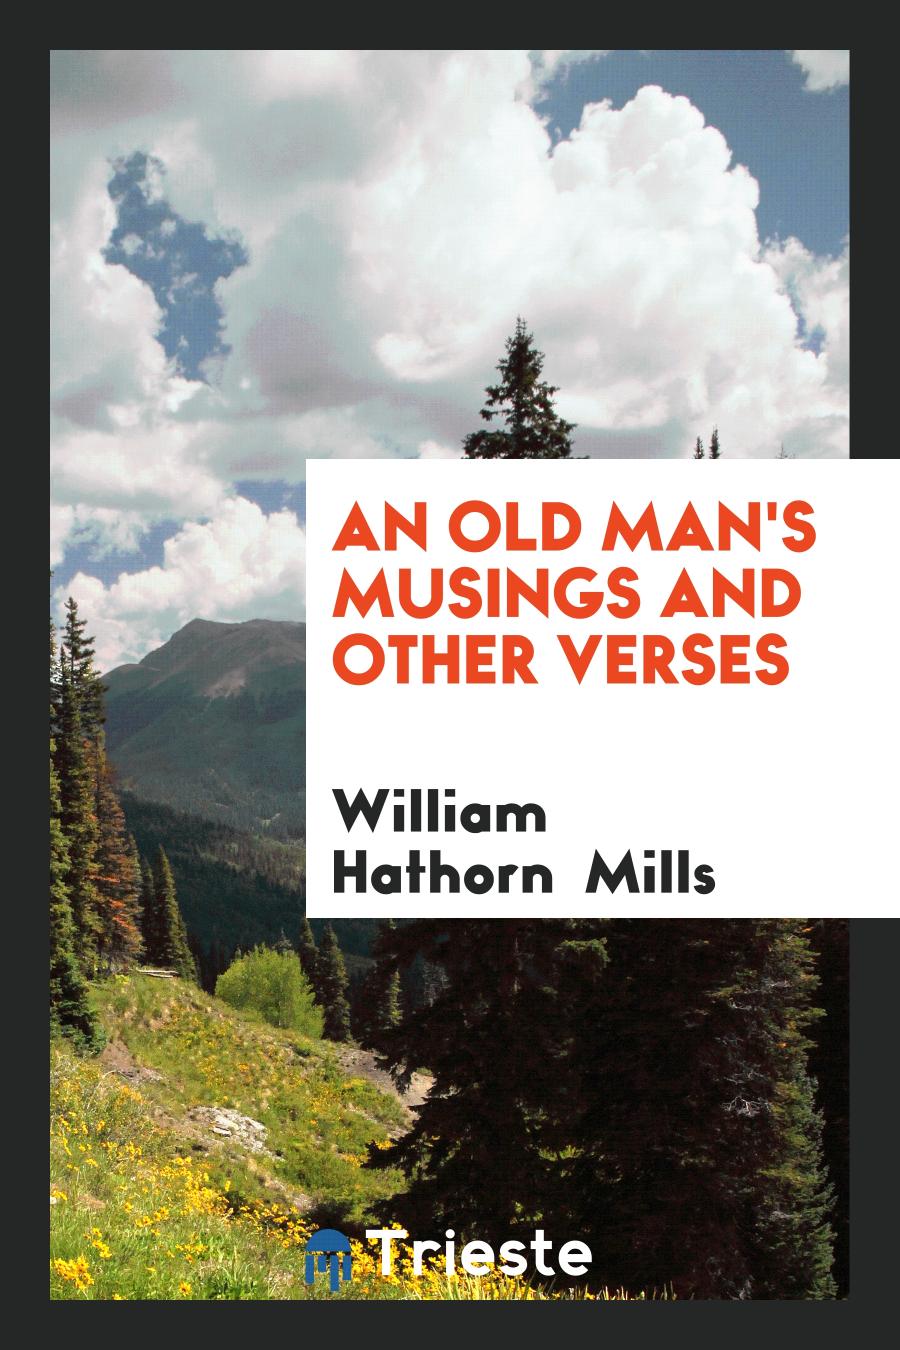 An Old Man's Musings and Other Verses